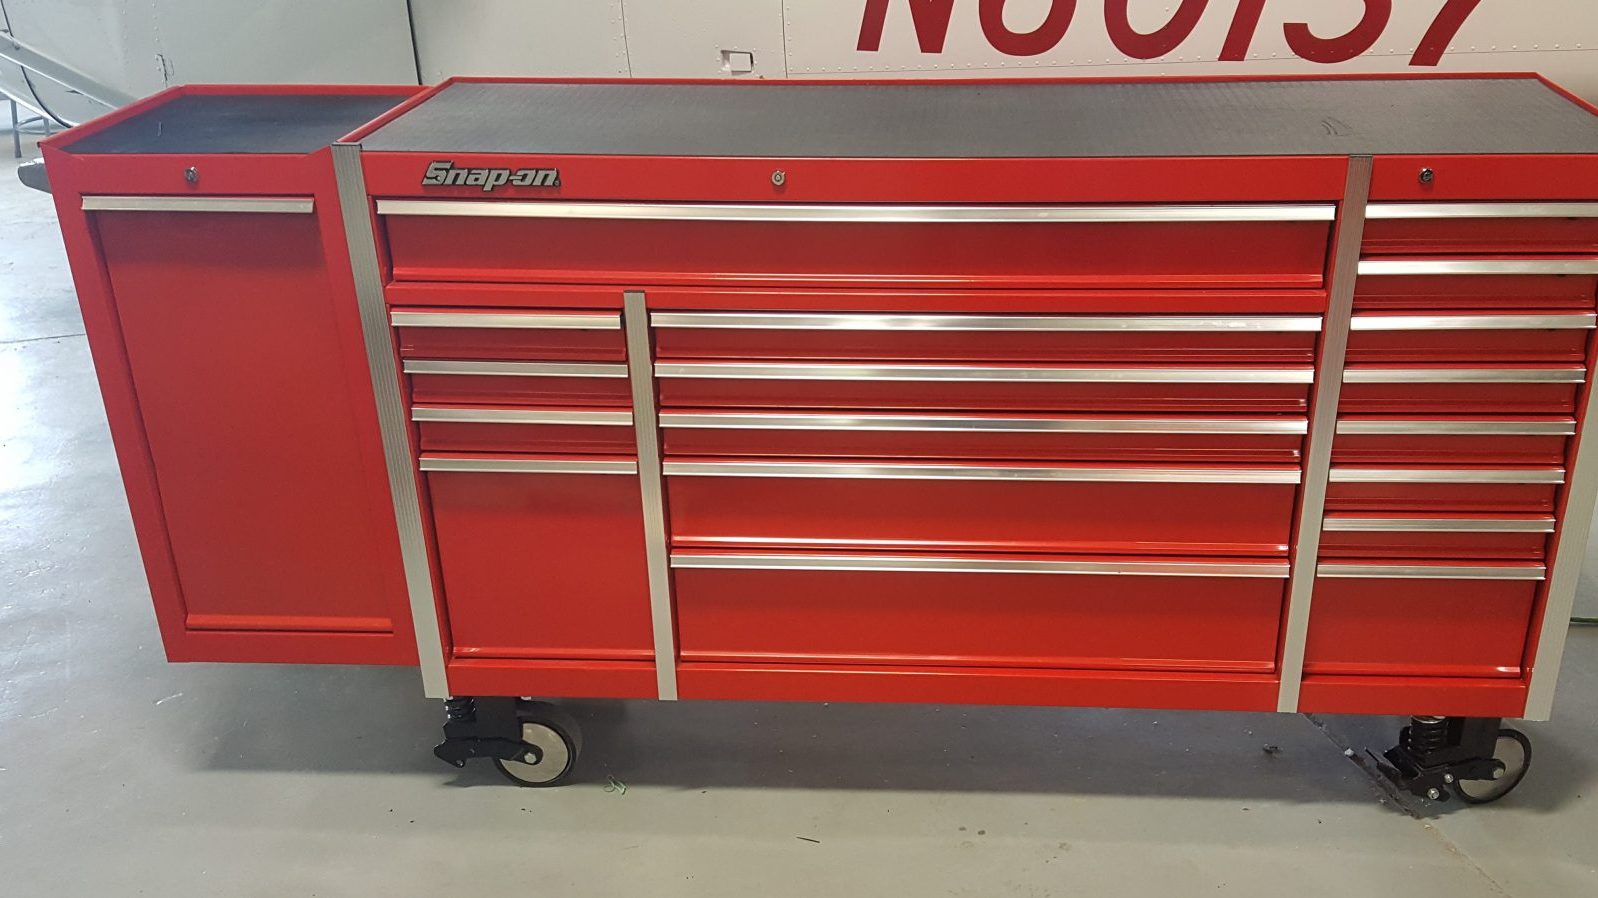 Metalworking Hacks Add Functionality To Snap-On Tool Chest